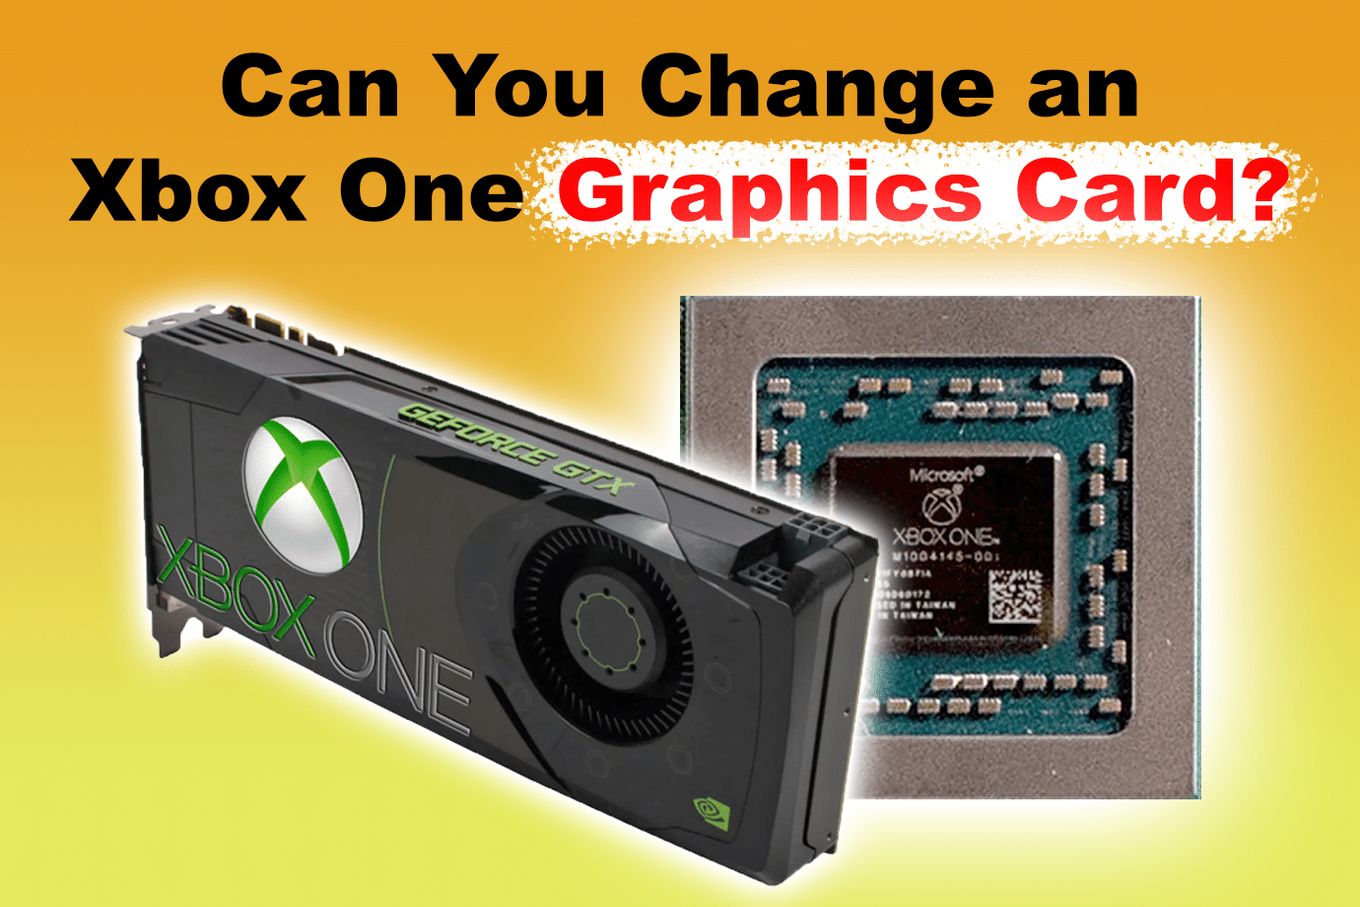 Can You Change Your Xbox One Graphics Card?